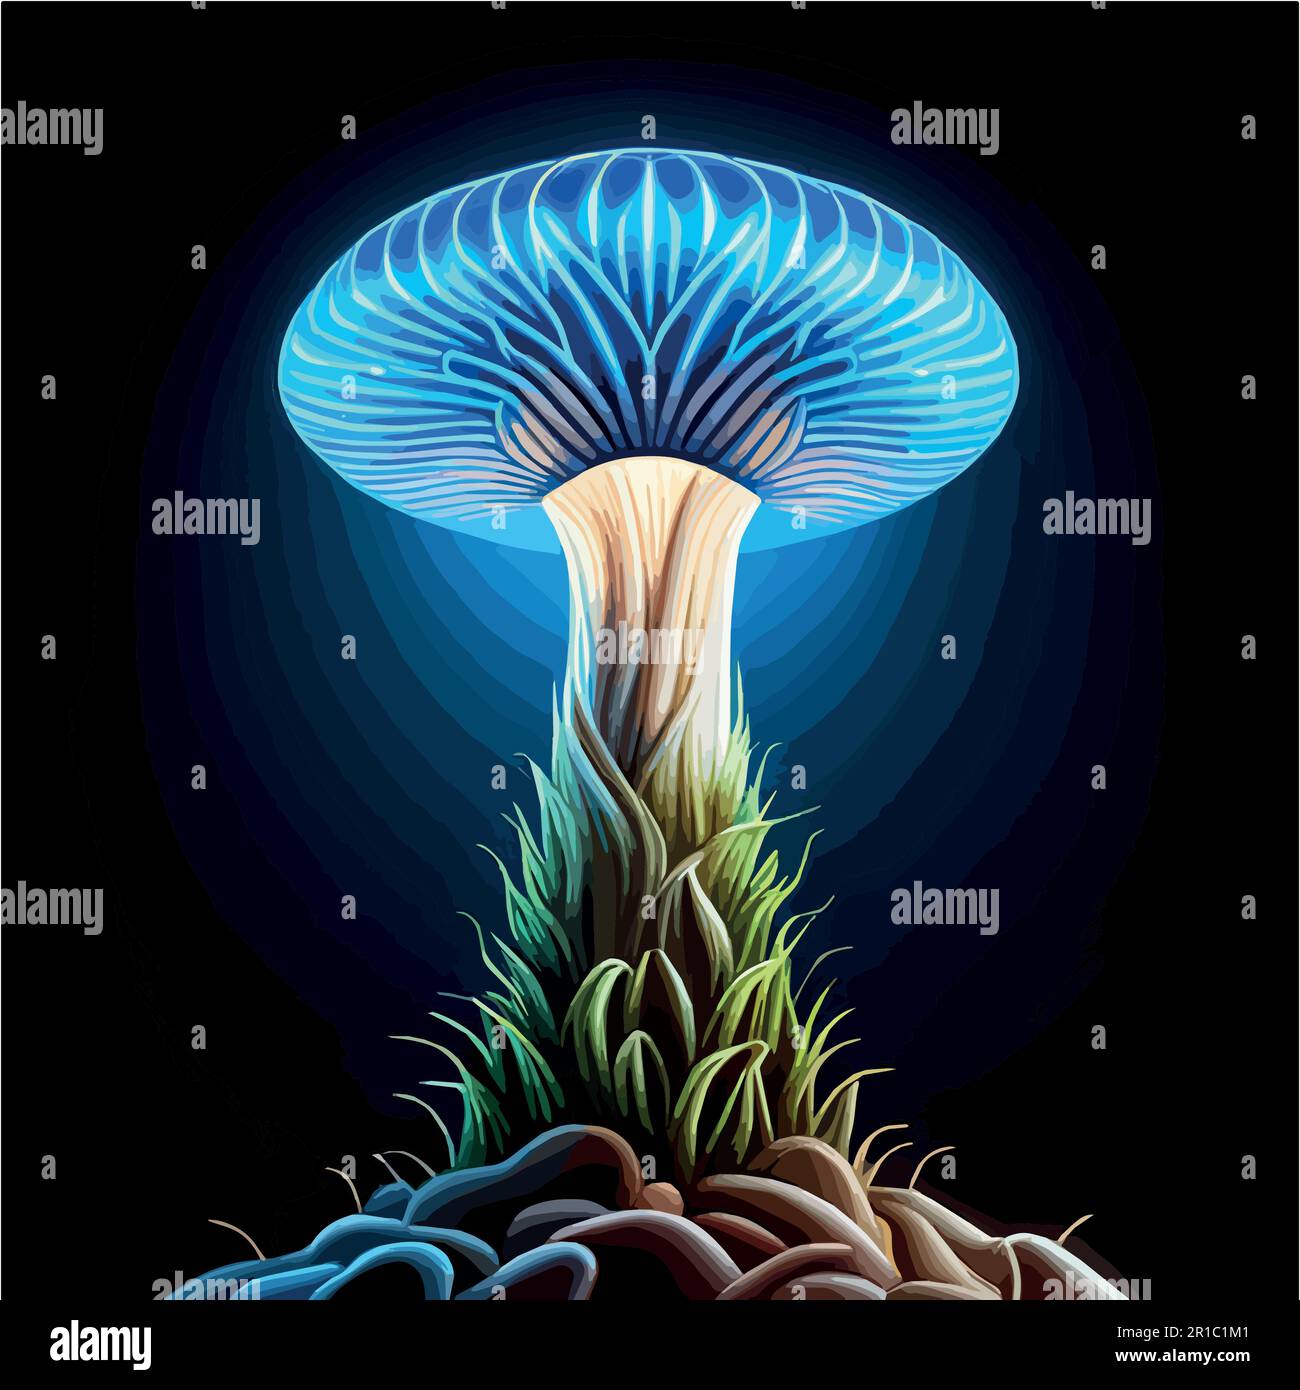 Download Psychedelic Mushroom Retro Style Wallpaper | Wallpapers.com